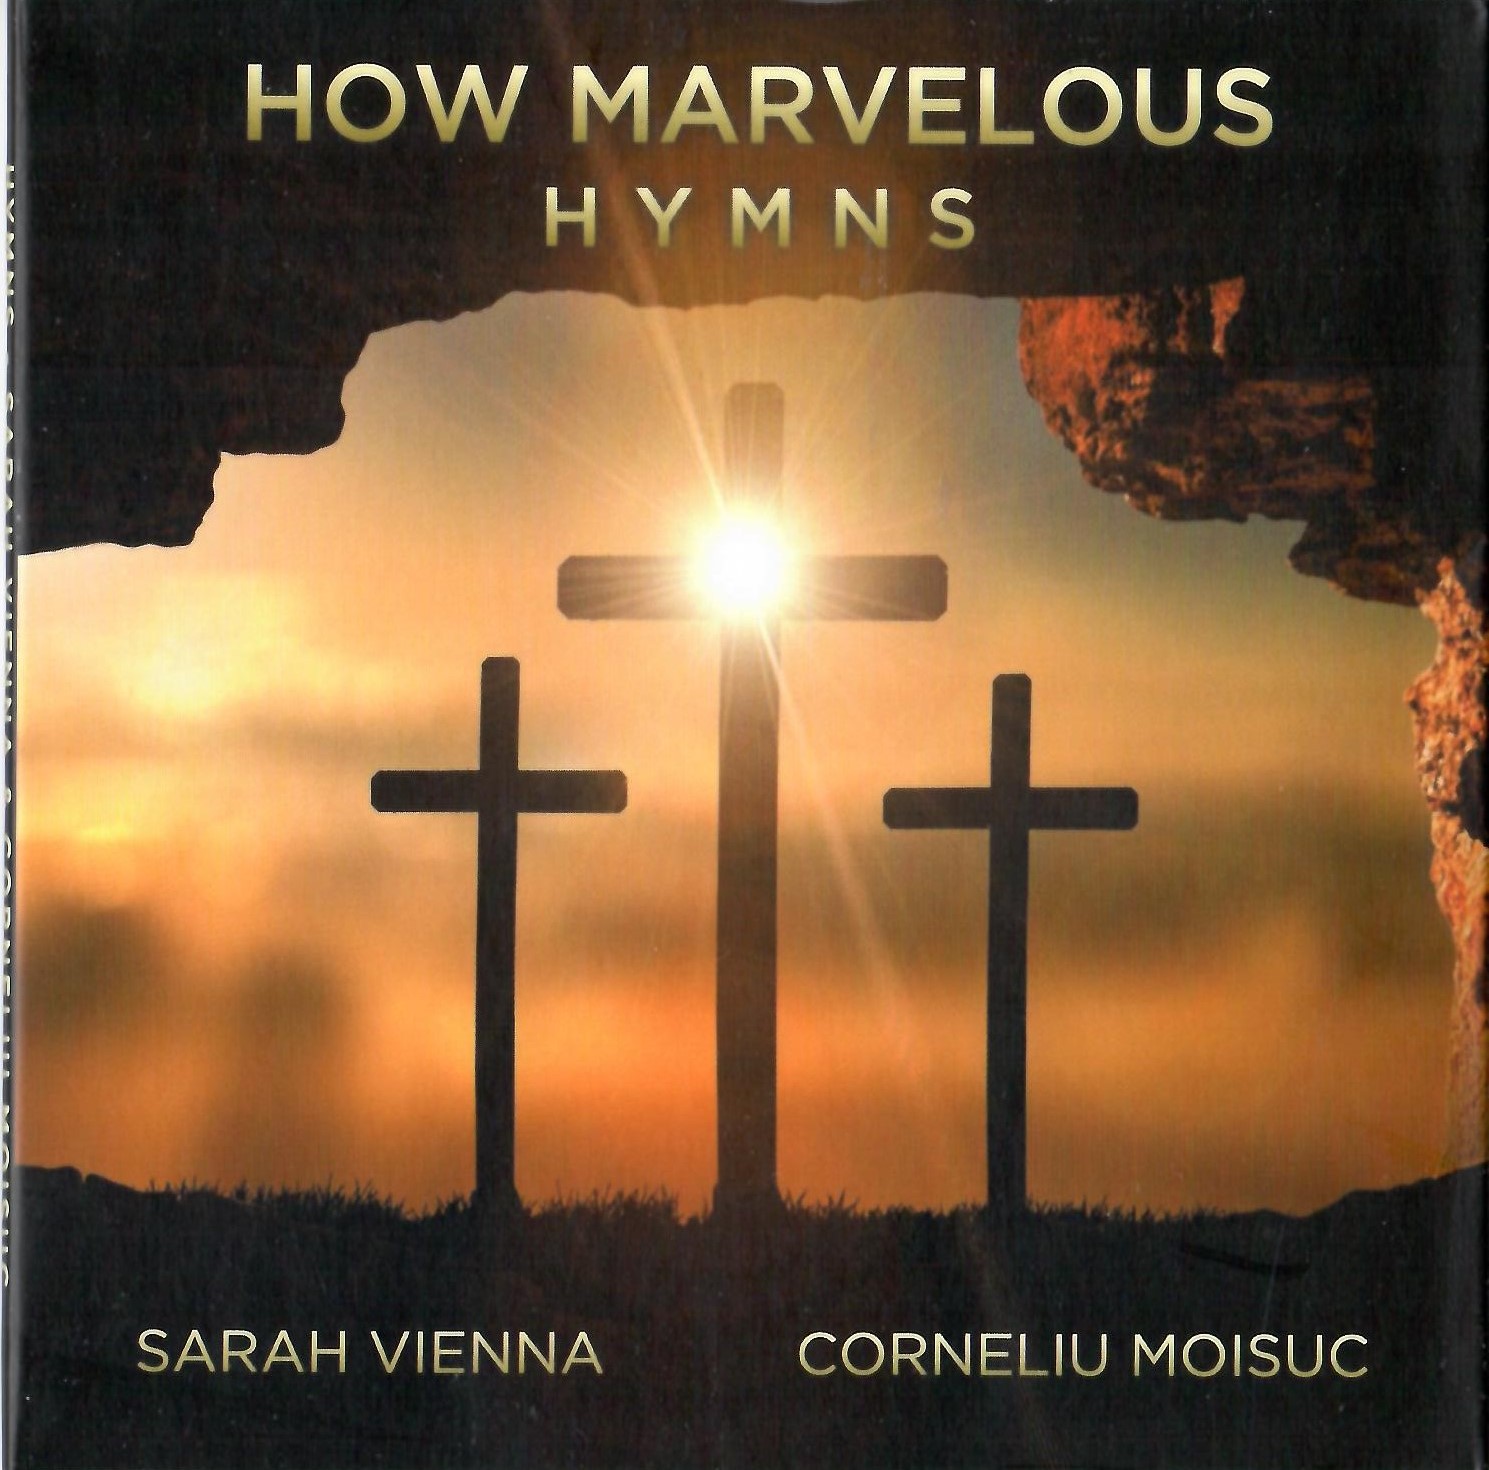 HOW MARVELOUS HYMNS